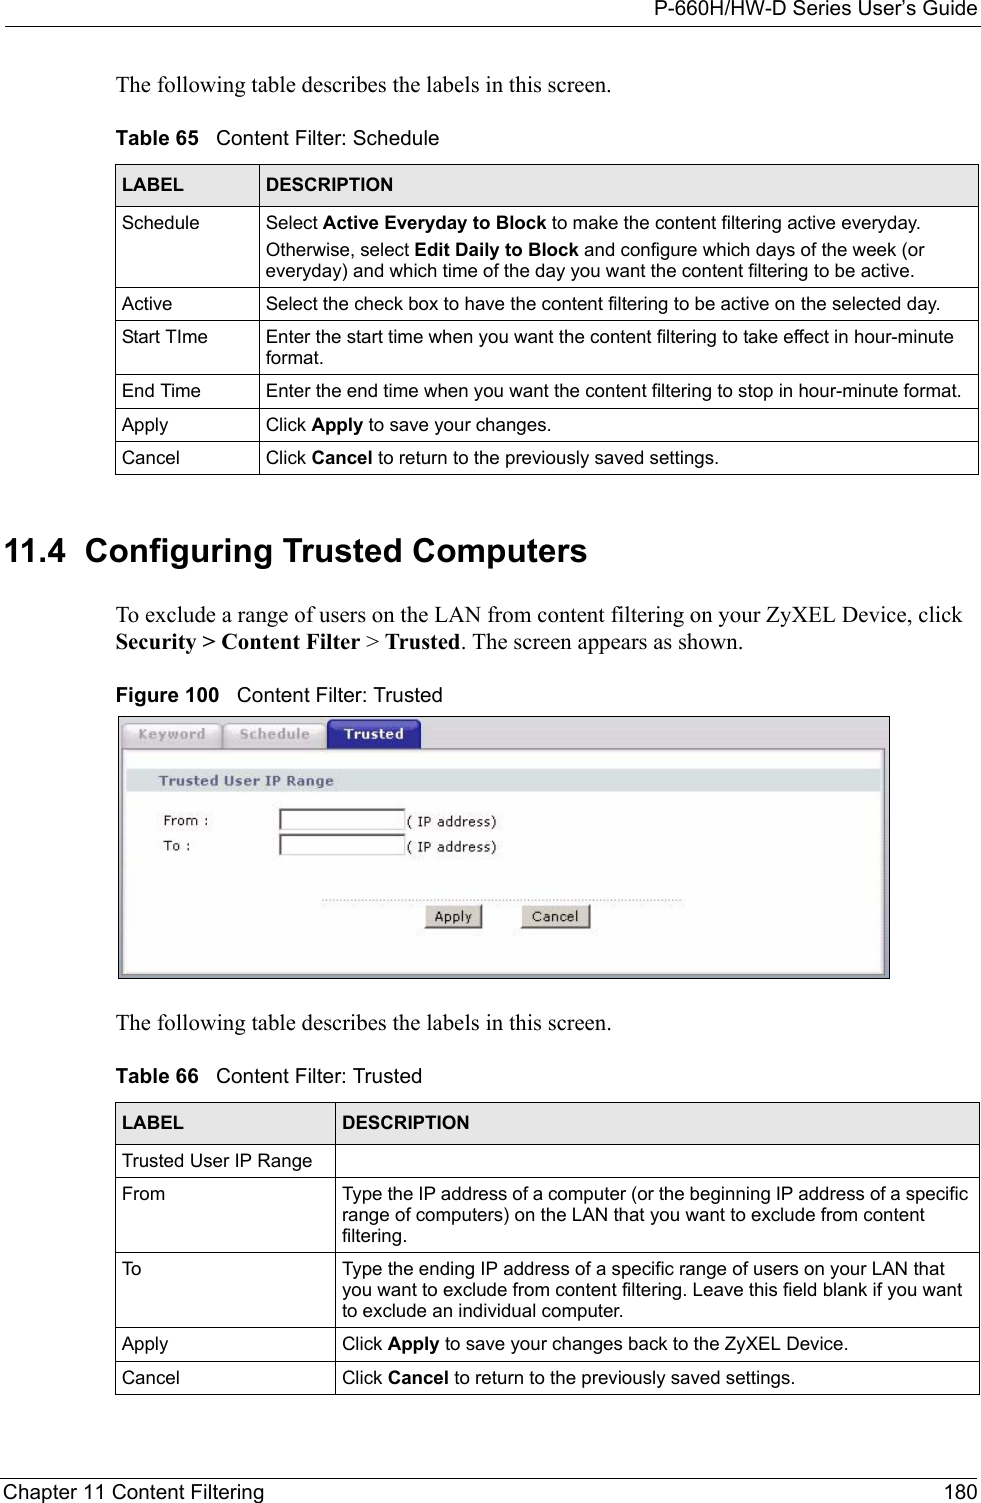 P-660H/HW-D Series User’s GuideChapter 11 Content Filtering 180The following table describes the labels in this screen.   11.4  Configuring Trusted Computers  To exclude a range of users on the LAN from content filtering on your ZyXEL Device, click Security &gt; Content Filter &gt; Trusted. The screen appears as shown.Figure 100   Content Filter: TrustedThe following table describes the labels in this screen. Table 65   Content Filter: ScheduleLABEL DESCRIPTIONSchedule Select Active Everyday to Block to make the content filtering active everyday.Otherwise, select Edit Daily to Block and configure which days of the week (or everyday) and which time of the day you want the content filtering to be active. Active Select the check box to have the content filtering to be active on the selected day.Start TIme Enter the start time when you want the content filtering to take effect in hour-minute format.End Time Enter the end time when you want the content filtering to stop in hour-minute format. Apply  Click Apply to save your changes. Cancel Click Cancel to return to the previously saved settings.Table 66   Content Filter: TrustedLABEL DESCRIPTIONTrusted User IP RangeFrom Type the IP address of a computer (or the beginning IP address of a specific range of computers) on the LAN that you want to exclude from content filtering. To Type the ending IP address of a specific range of users on your LAN that you want to exclude from content filtering. Leave this field blank if you want to exclude an individual computer.Apply  Click Apply to save your changes back to the ZyXEL Device. Cancel Click Cancel to return to the previously saved settings.